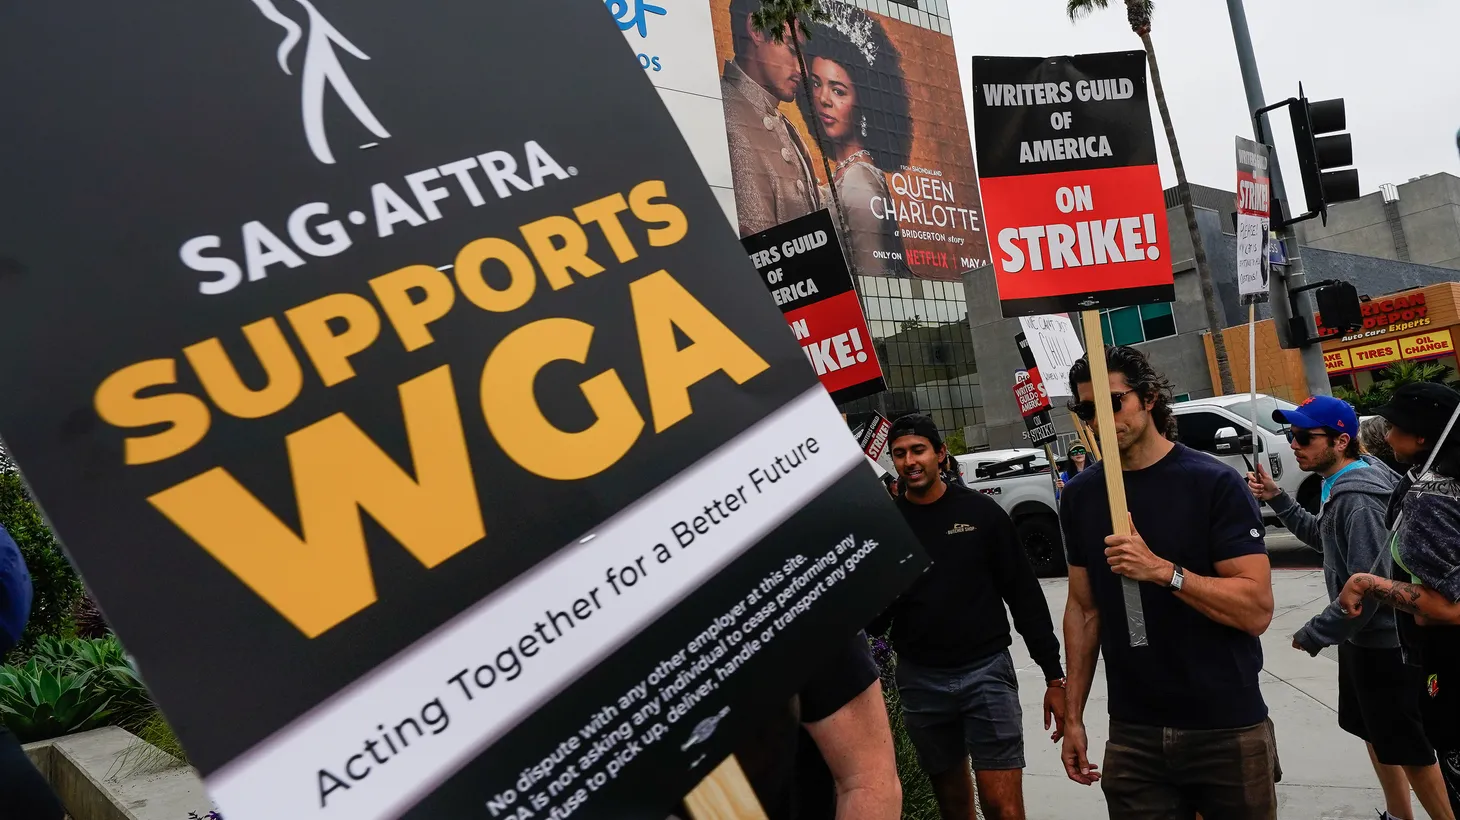 Members of the Writers Guild of America picket at Sunset Bronson Studios, where Netflix Studio is located. One sign says, “SAG-AFTRA supports WGA.” The writers are seeking a new contract with the Alliance of Motion Picture and Television Producers. May 23, 2023. Los Angeles, California, USA.